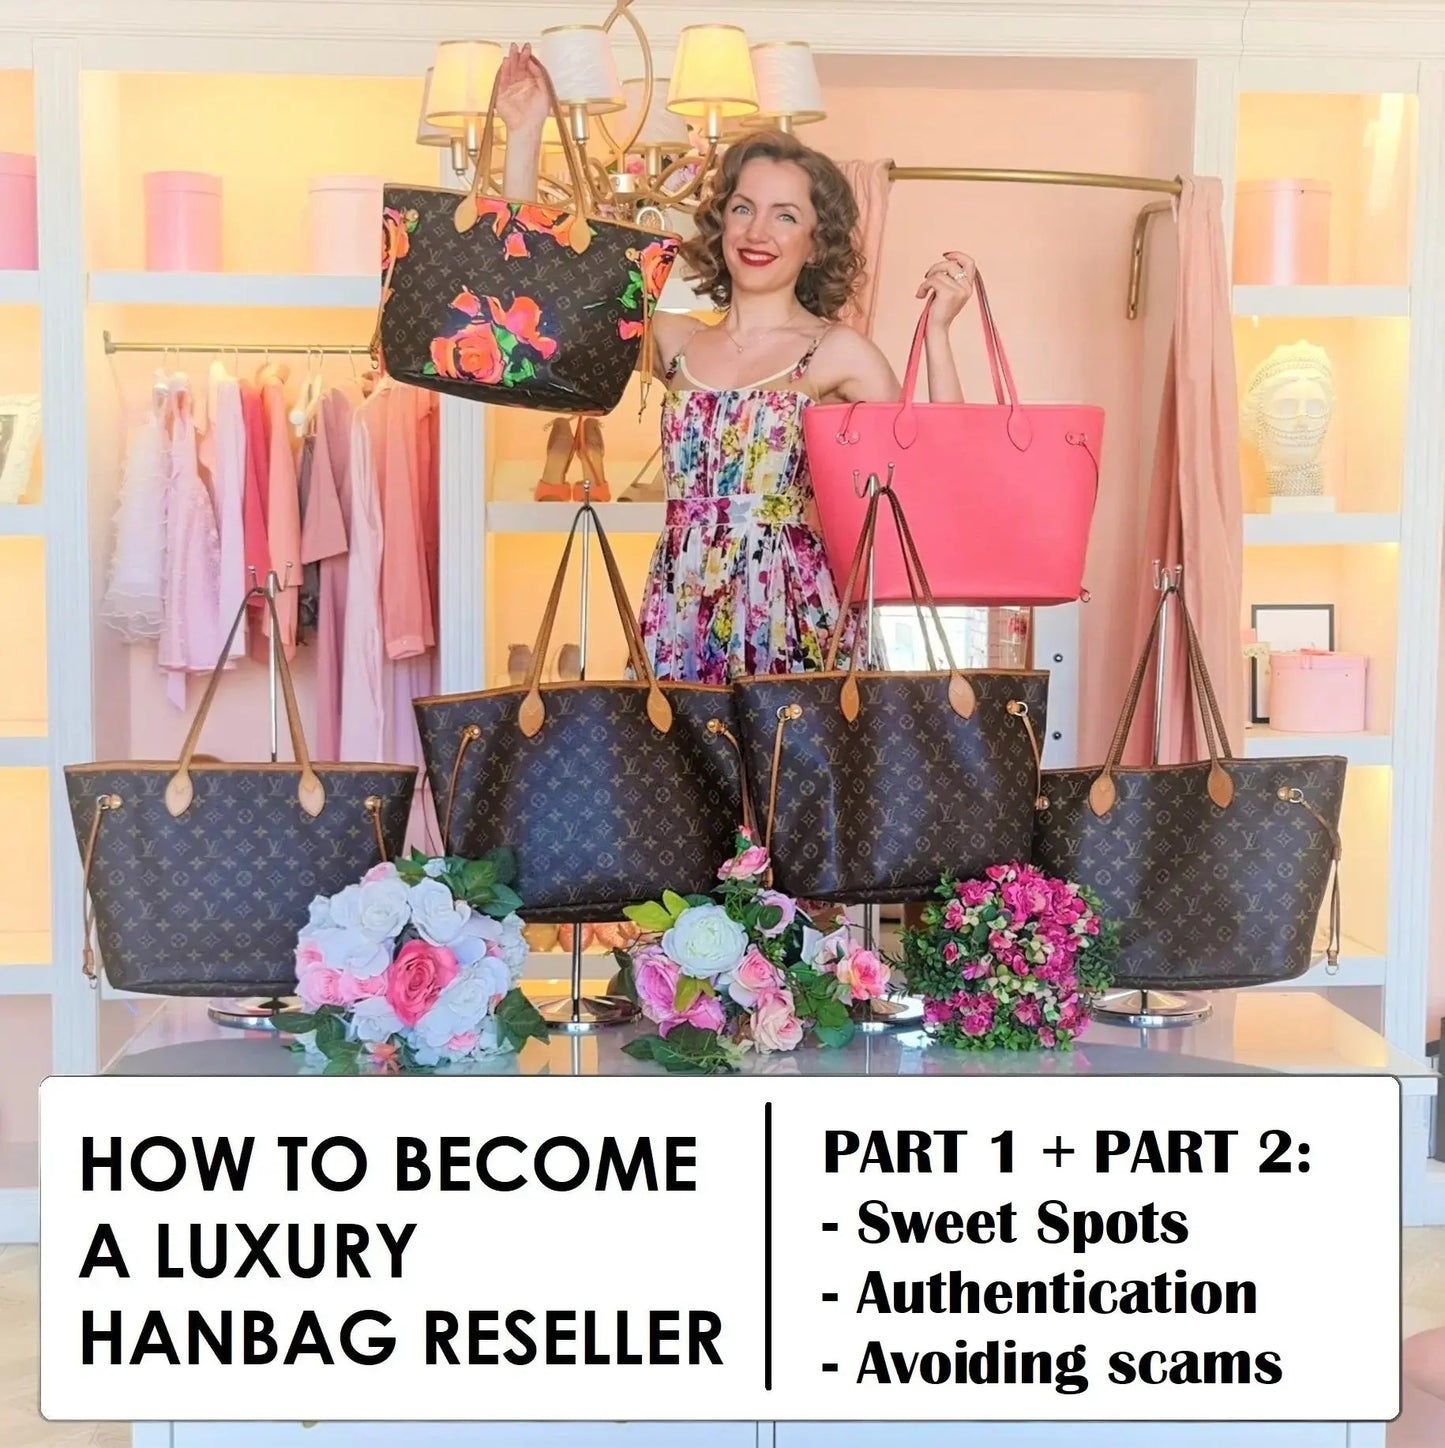 Load image into Gallery viewer, Bagaholic How To Become a Luxury Handbag Reseller Online Course (PART 1 + PART 2) LVBagaholic
